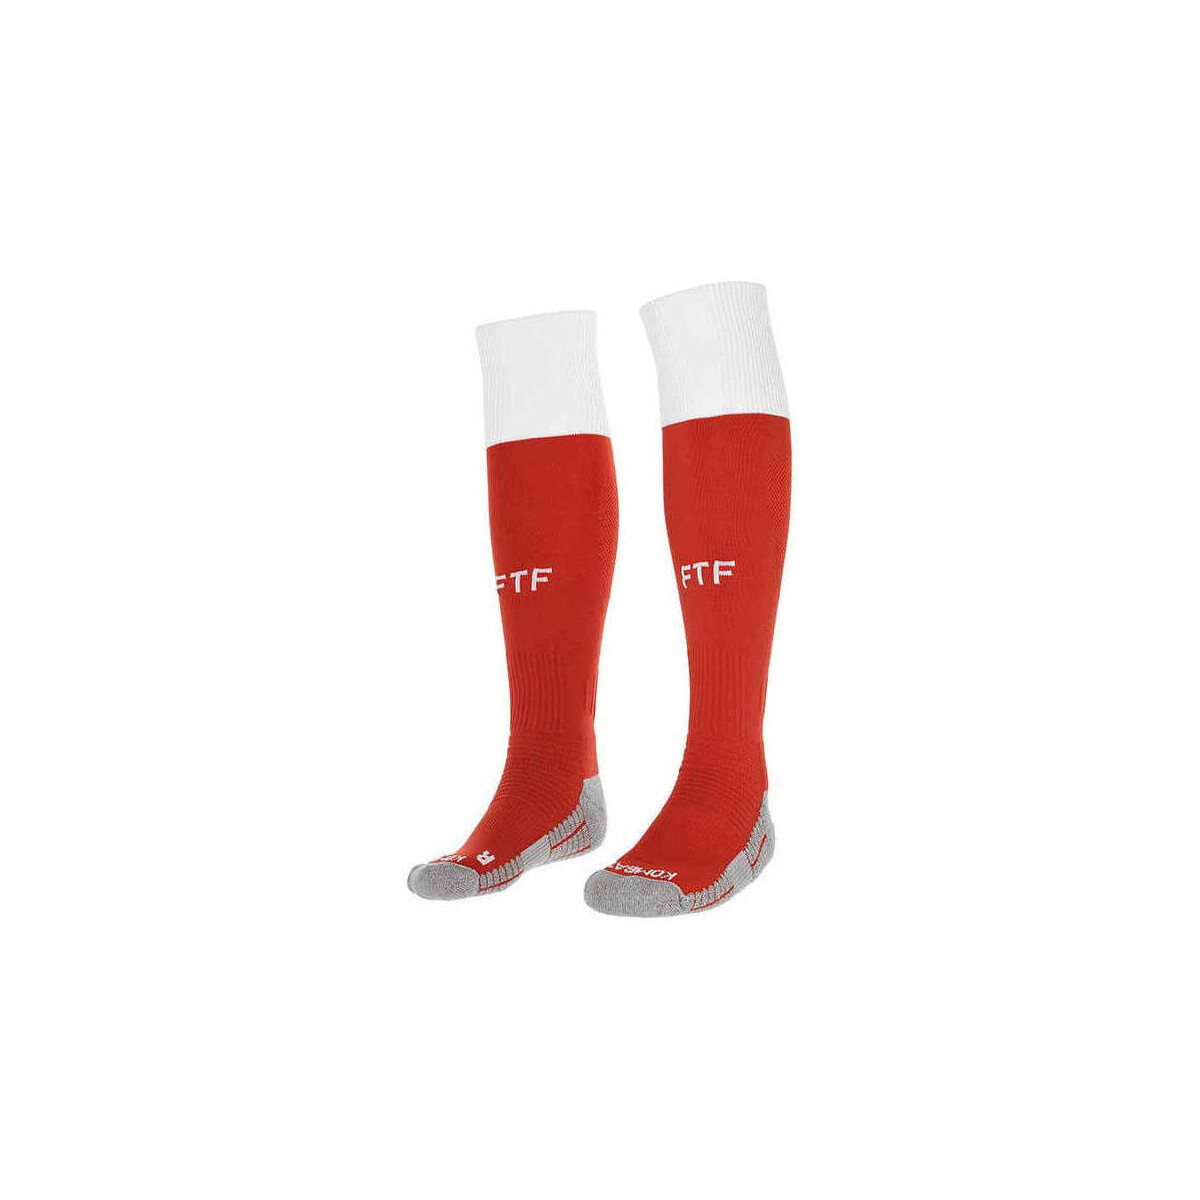 Kappa Rouge Chaussettes Kombat Spark Tunisie 22/23 N5fH